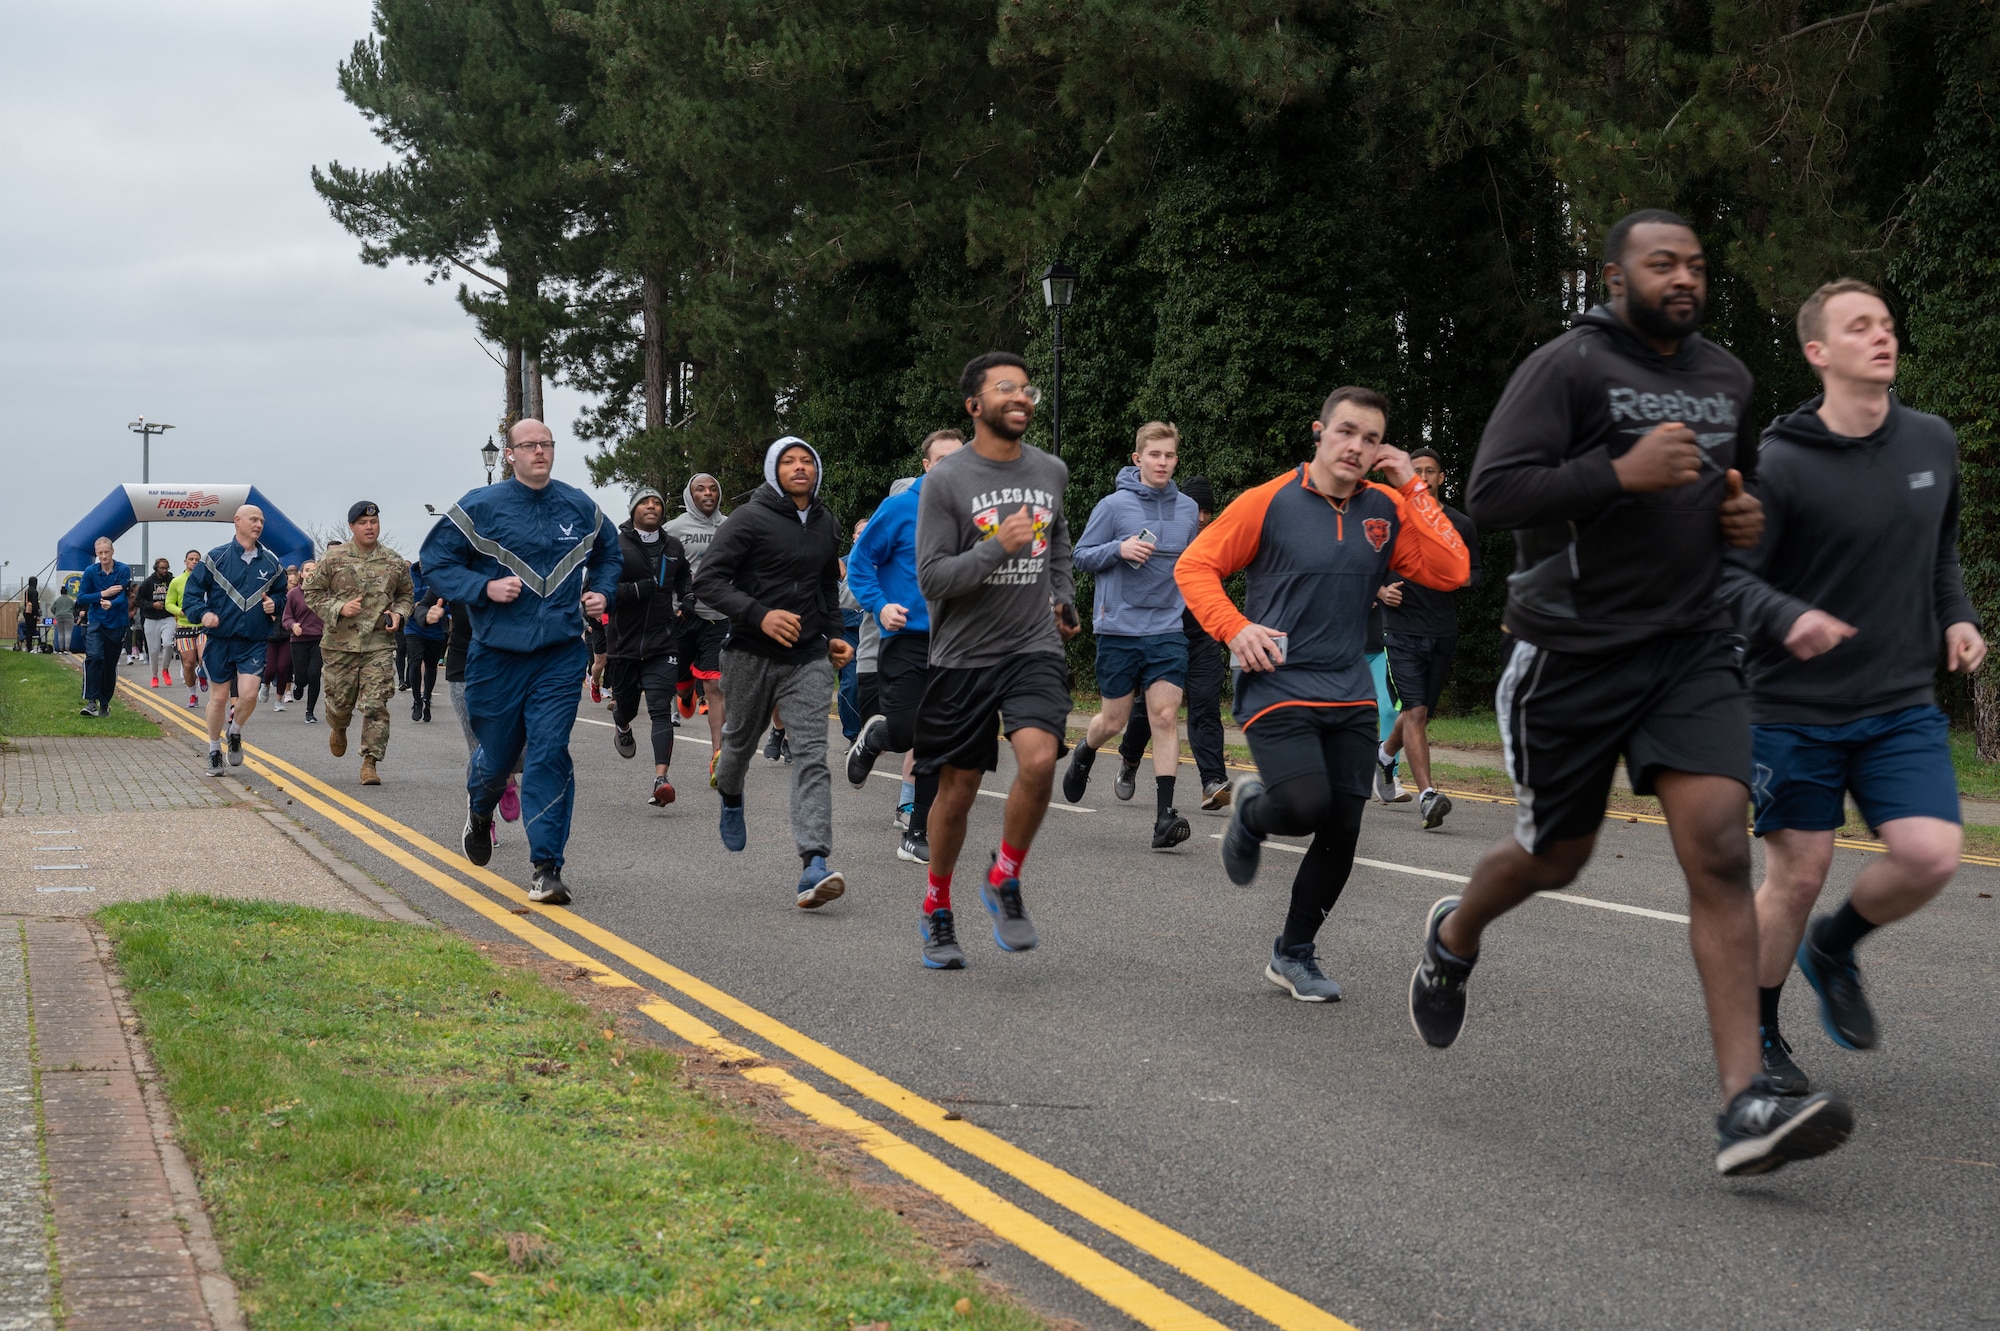 U.S. Air Force service members, spouses and family, start the first section of the Black History Month 5K run and walk, Feb. 23, 2023, at Royal Air Force Mildenhall, England.